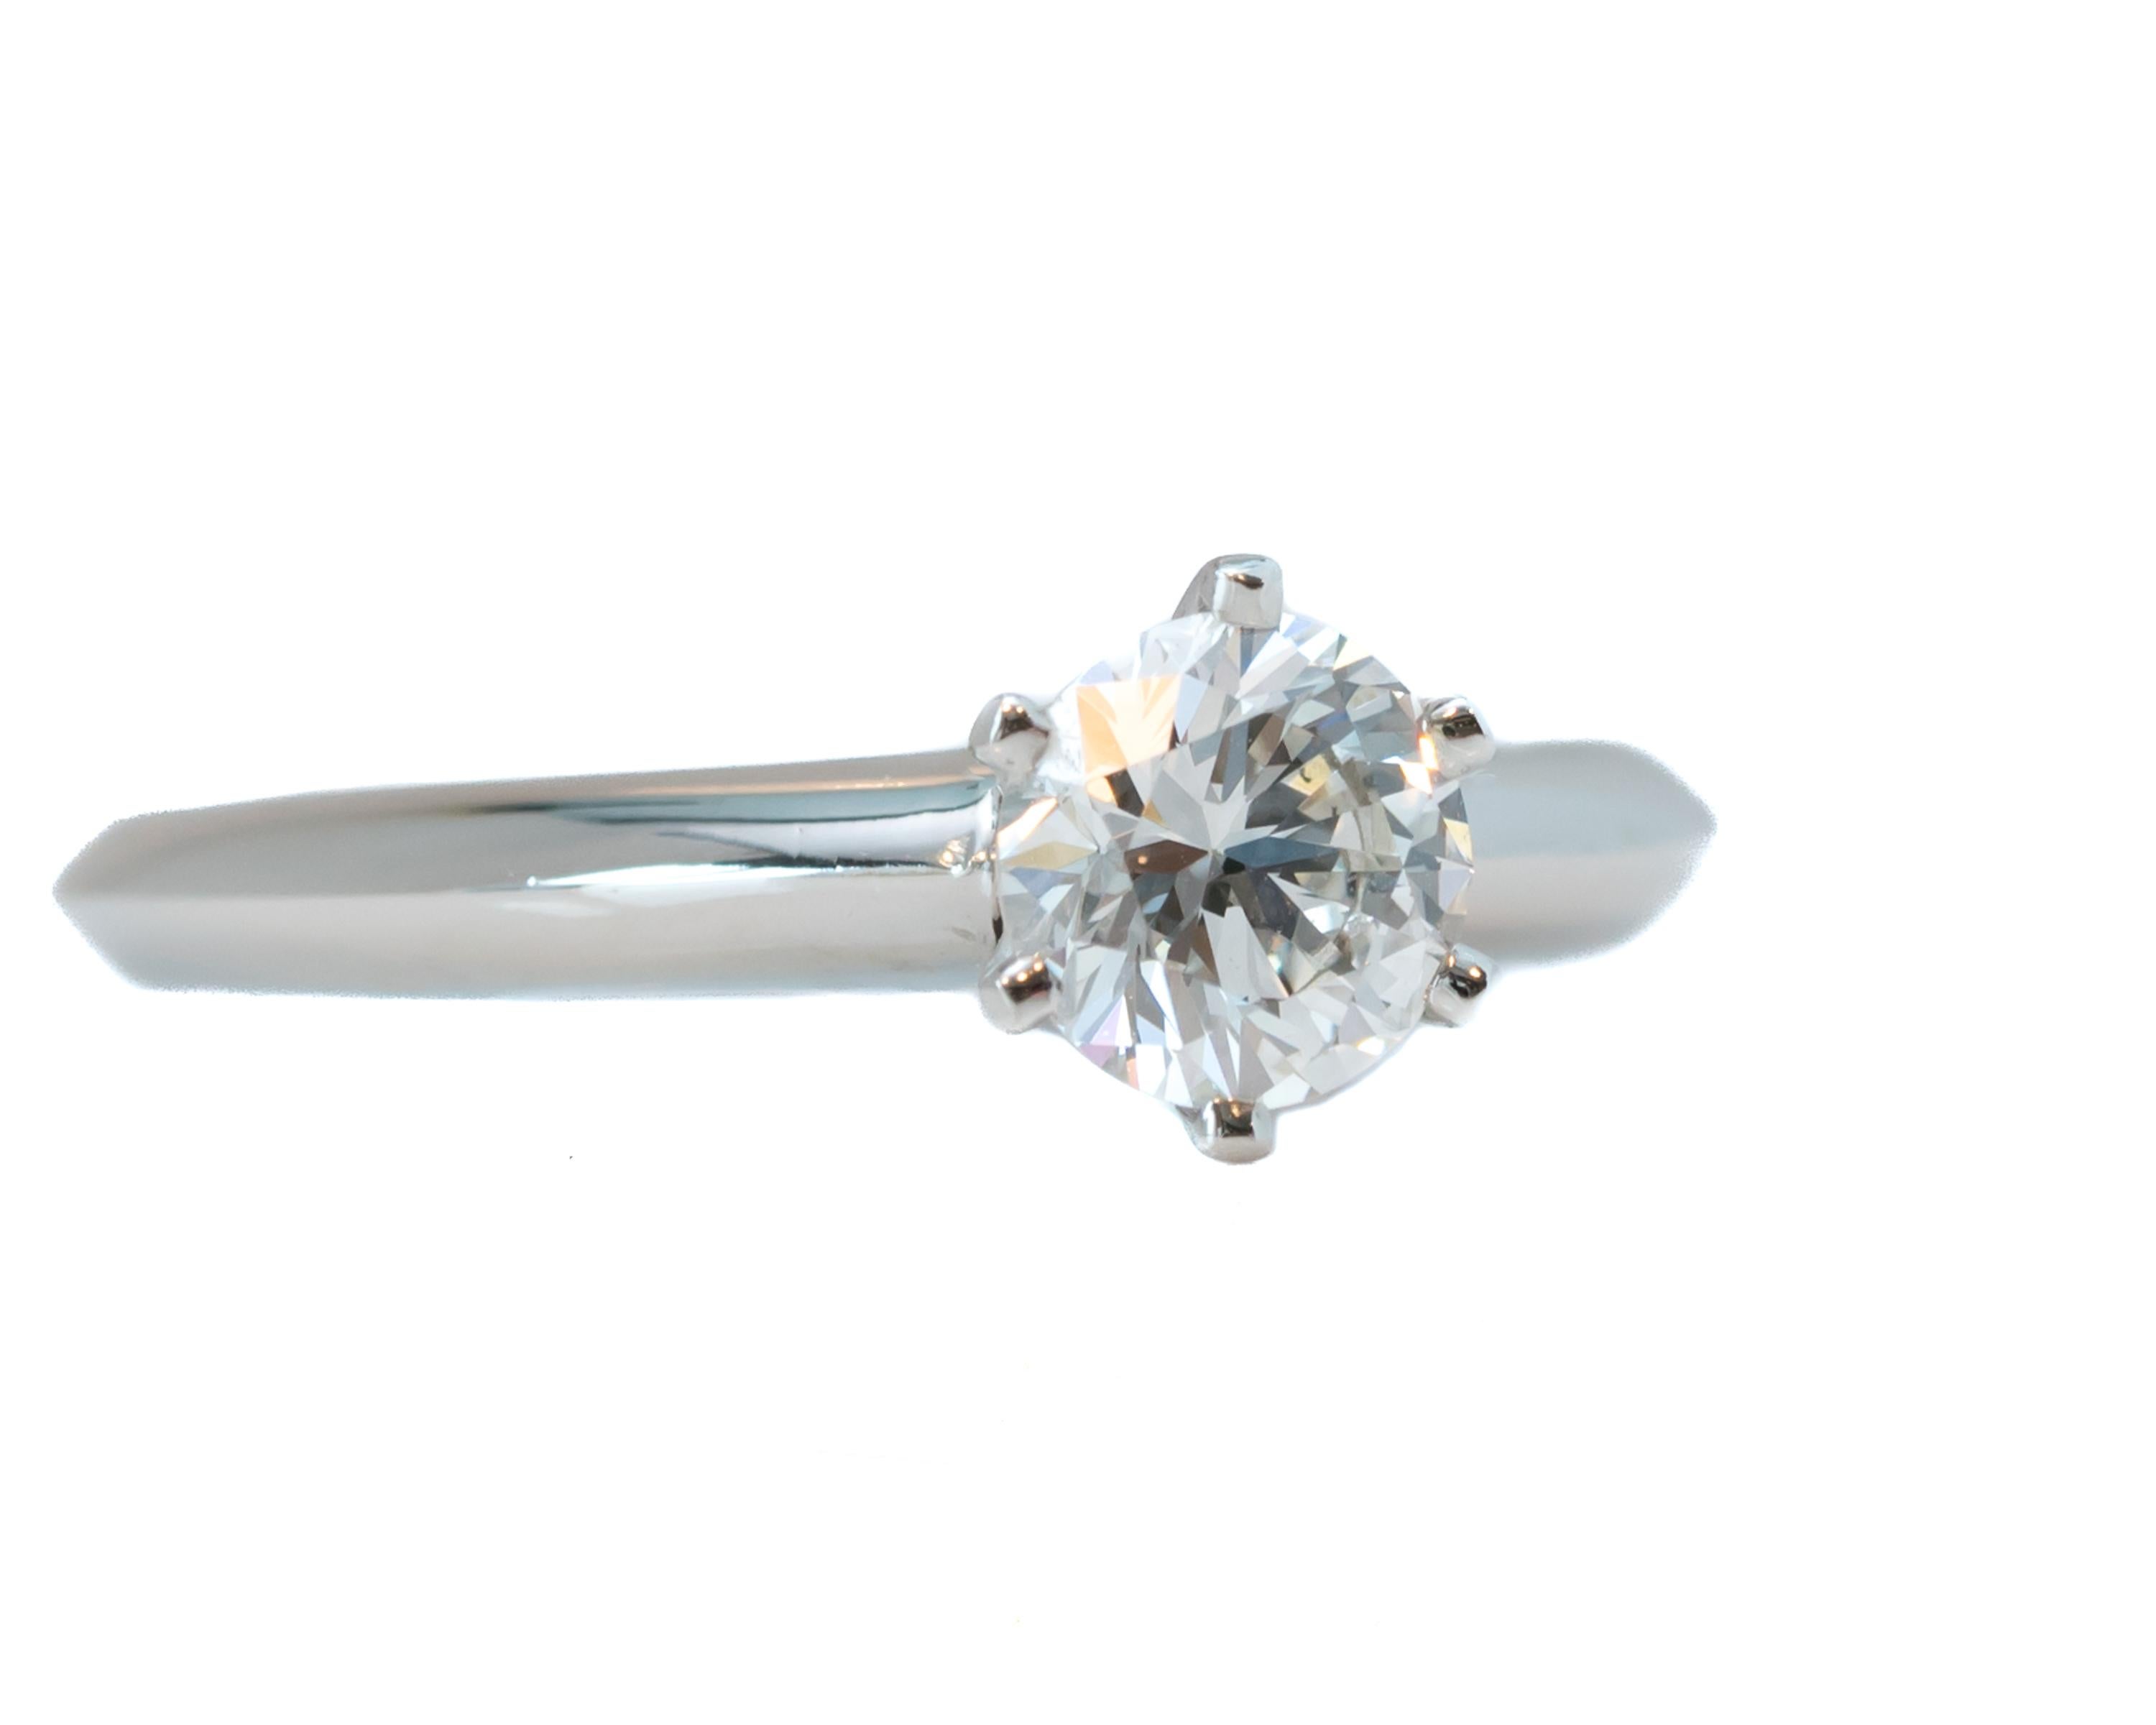 Give your loved one an irresistible ring with a Tiffany blue box.
This Tiffany and Co. engagement ring is GIA certified and has remained flawless since day one. 
This is a pristine diamond set in a high polish platinum ring.  

The band is a